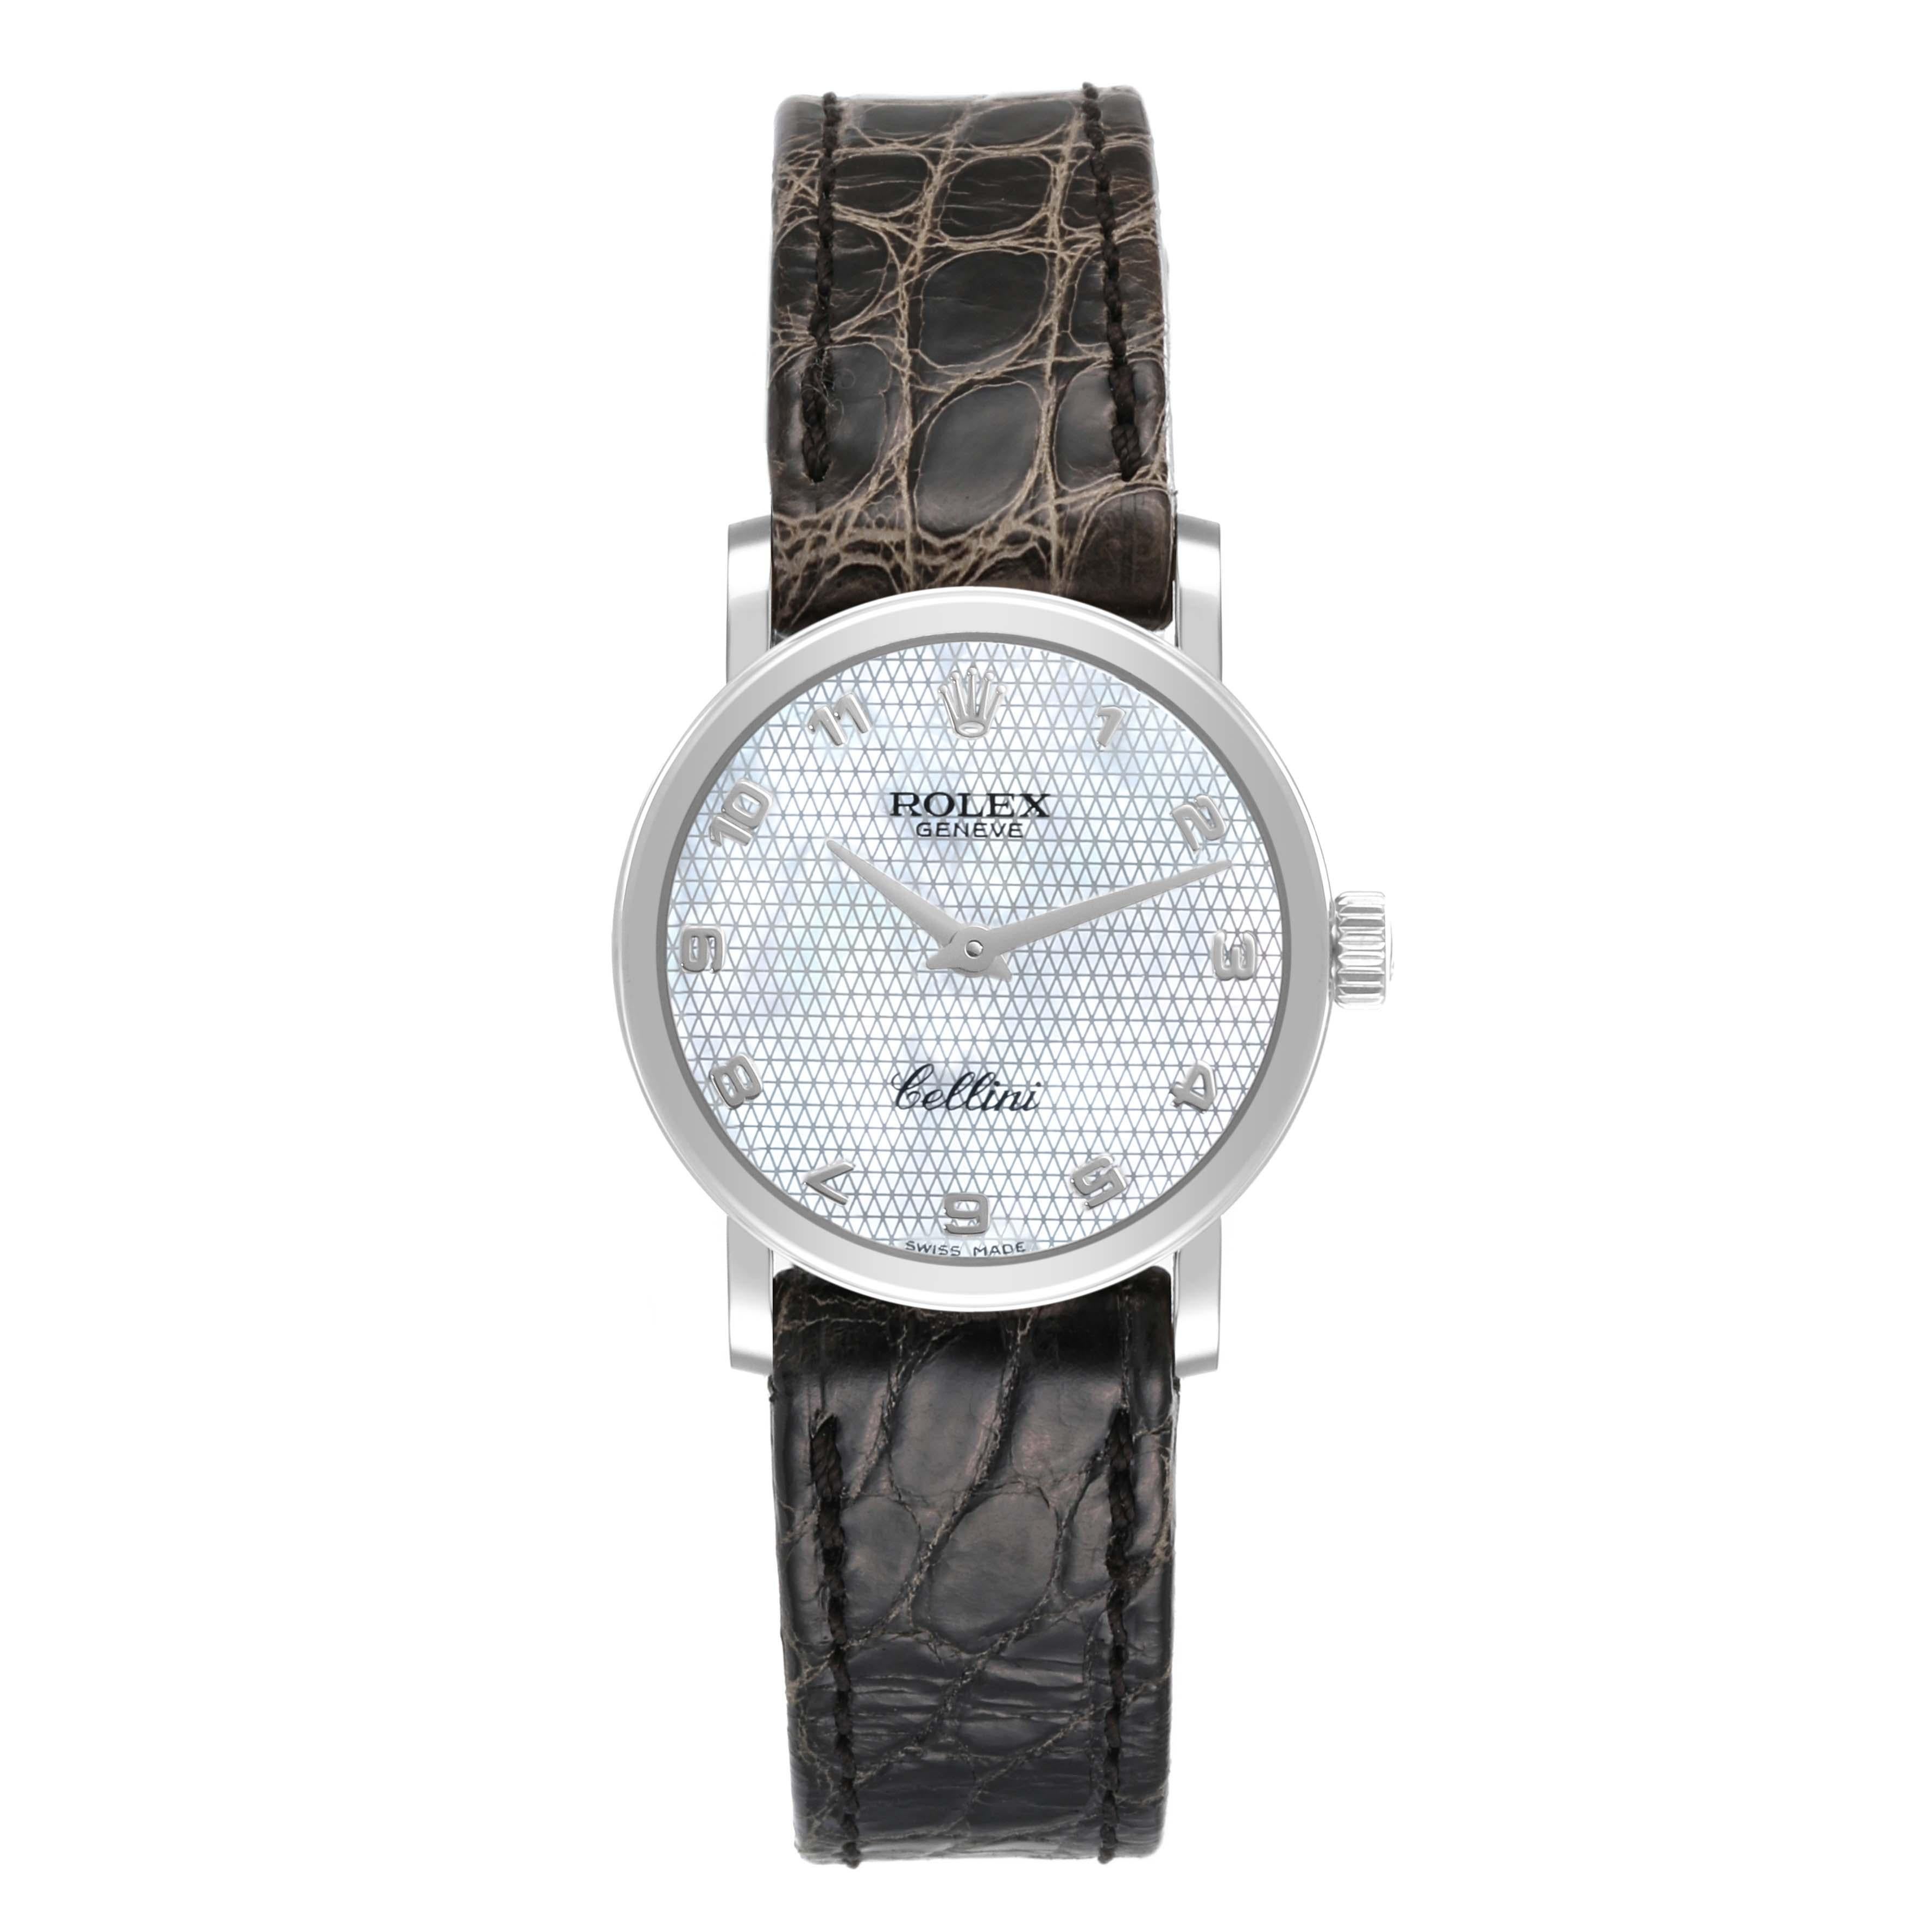 Rolex Cellini Classic White Gold Mother Of Pearl Dial Ladies Watch 6110 Unworn. Quartz movement. 18k white gold slim case 26.0 mm in diameter. . Scratch resistant sapphire crystal. Flat profile. Textured mother of pearl dial with raised Arabic